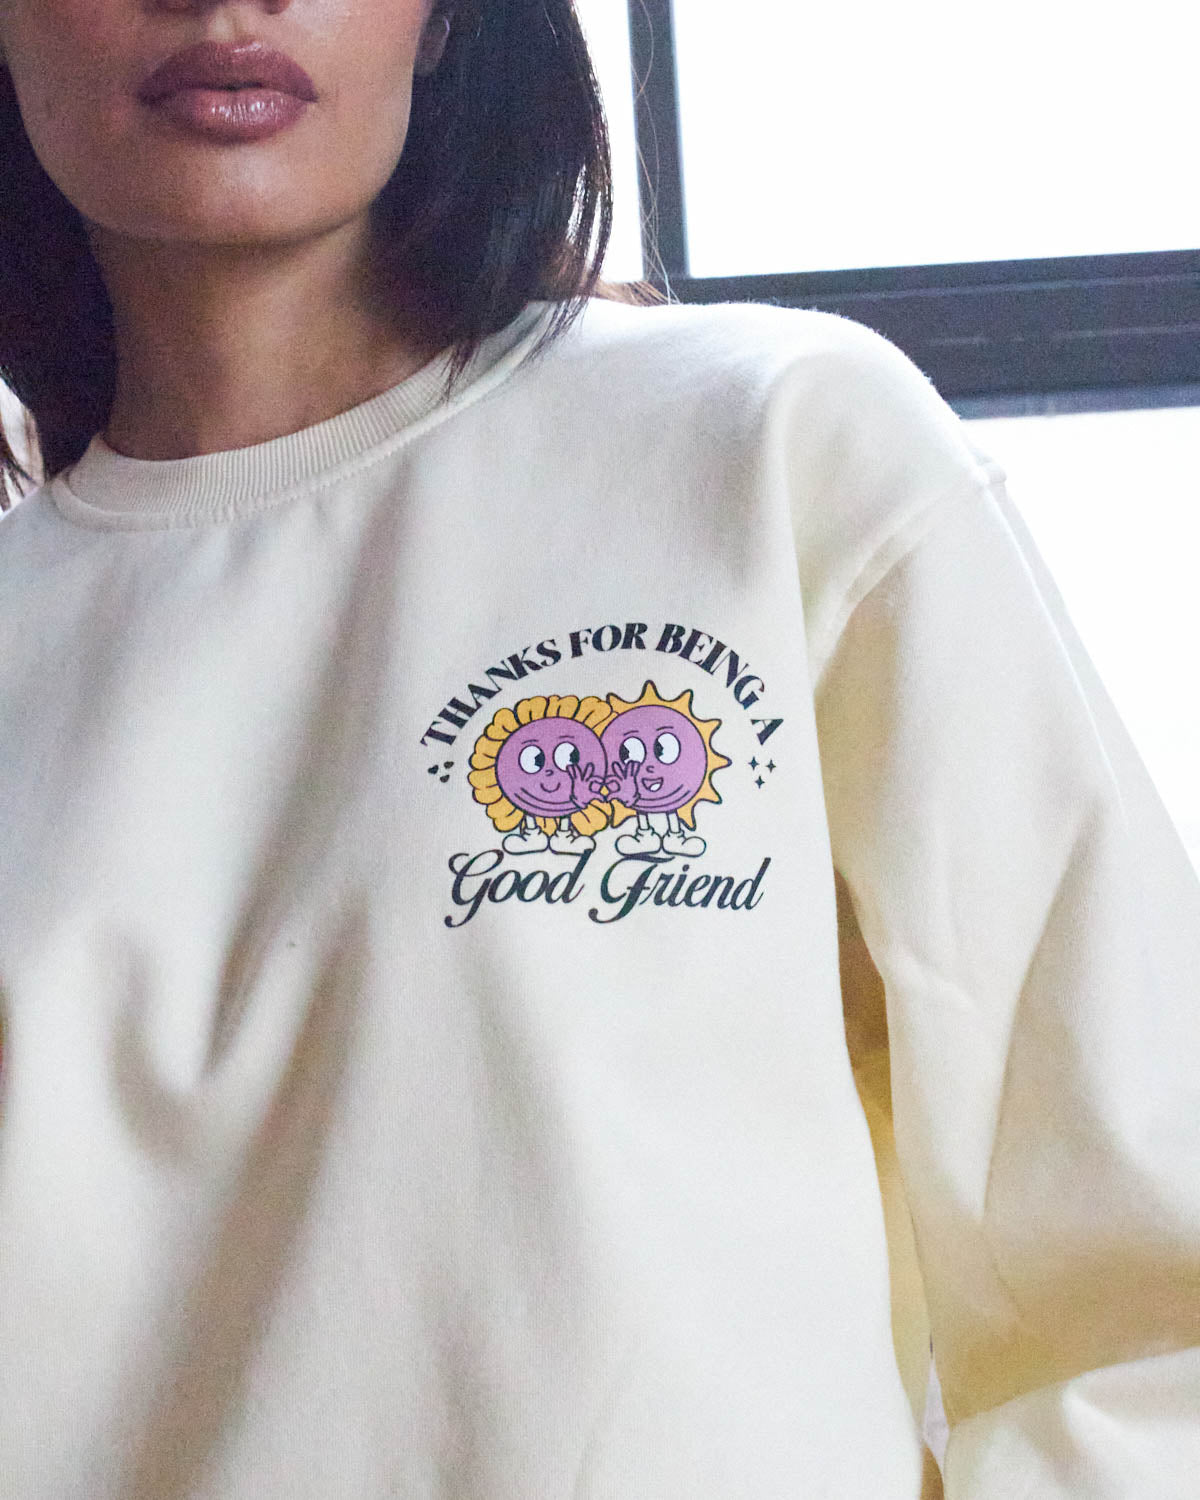 Thanks For Being A Good Friend Crewneck - Ivory